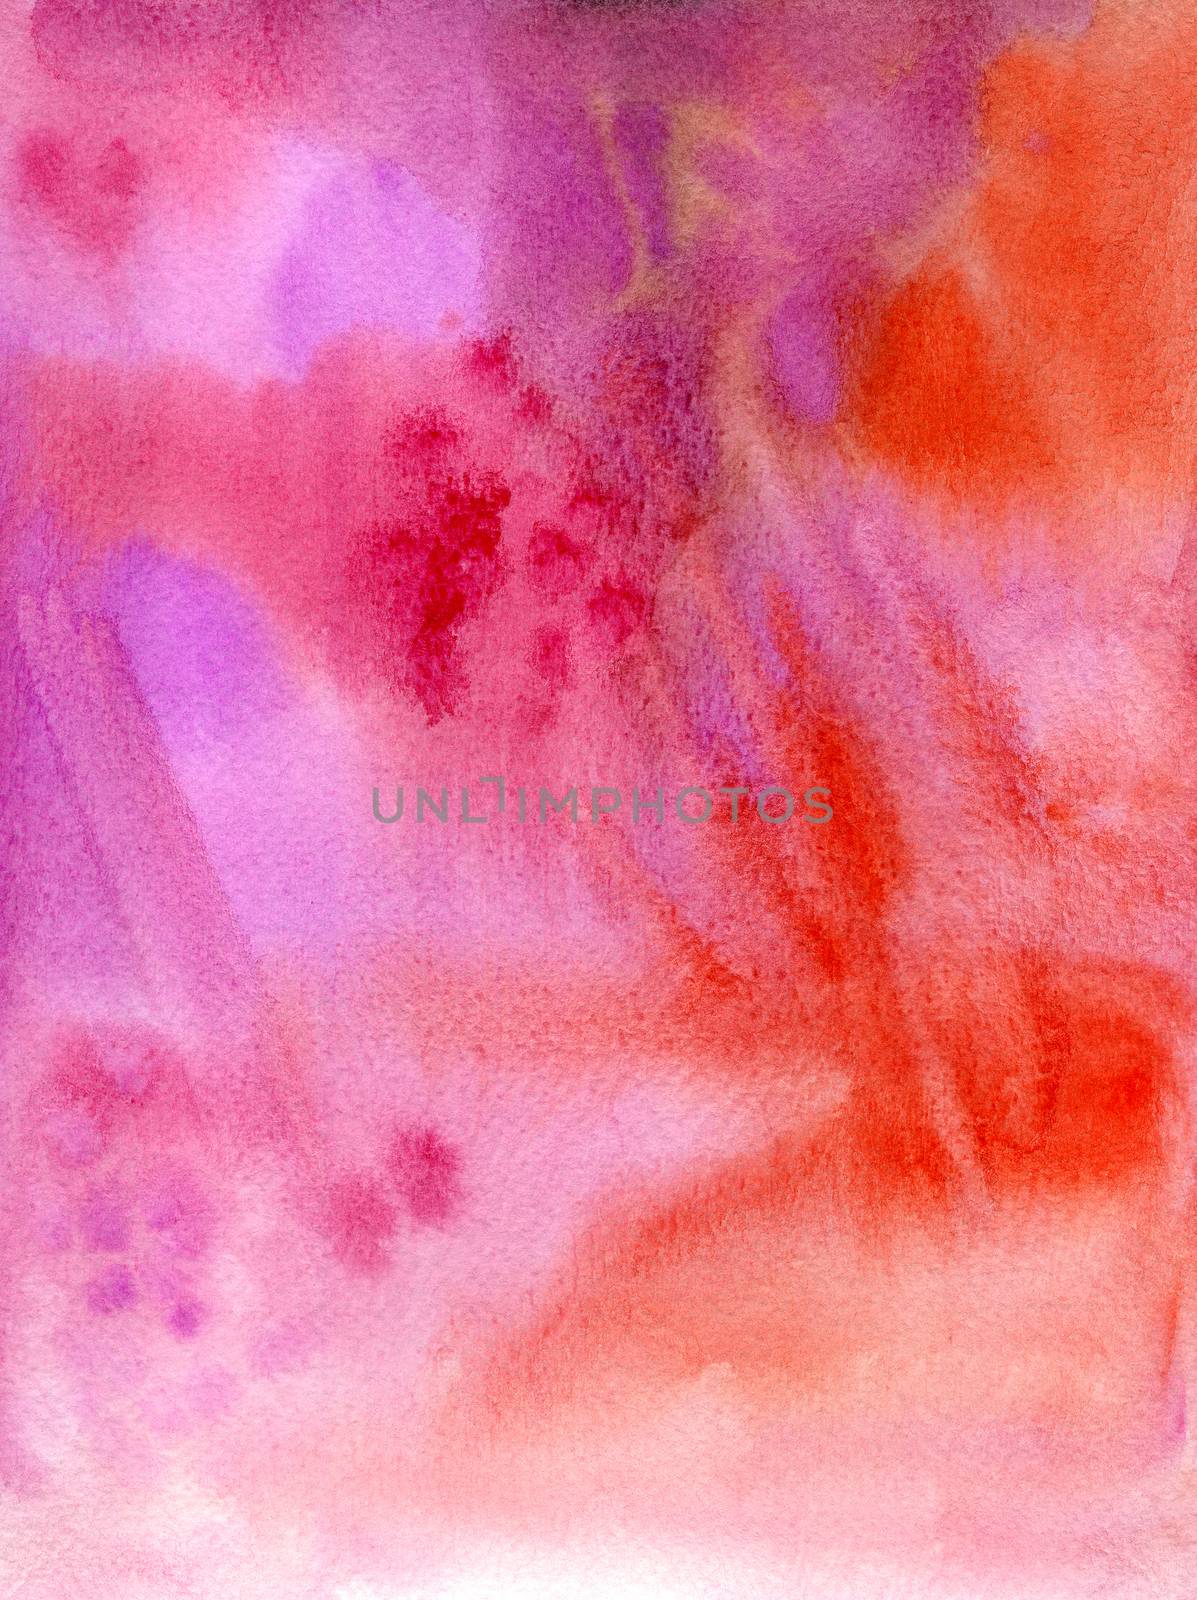 Hand drawing watercolor in red, orange and purple colors on texture paper. by LanaLeta